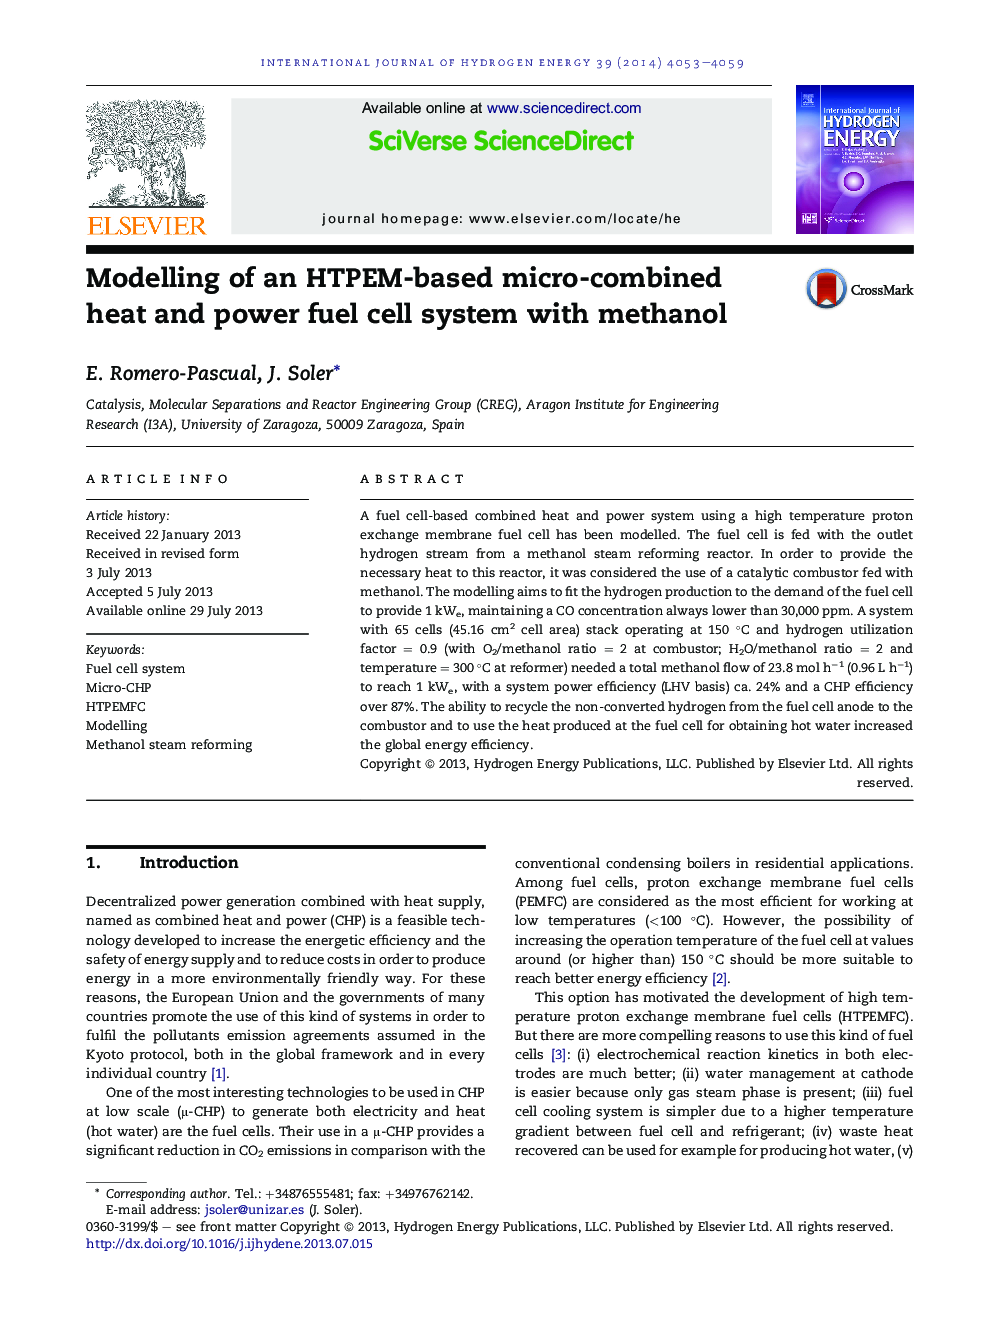 Modelling of an HTPEM-based micro-combined heat and power fuel cell system with methanol